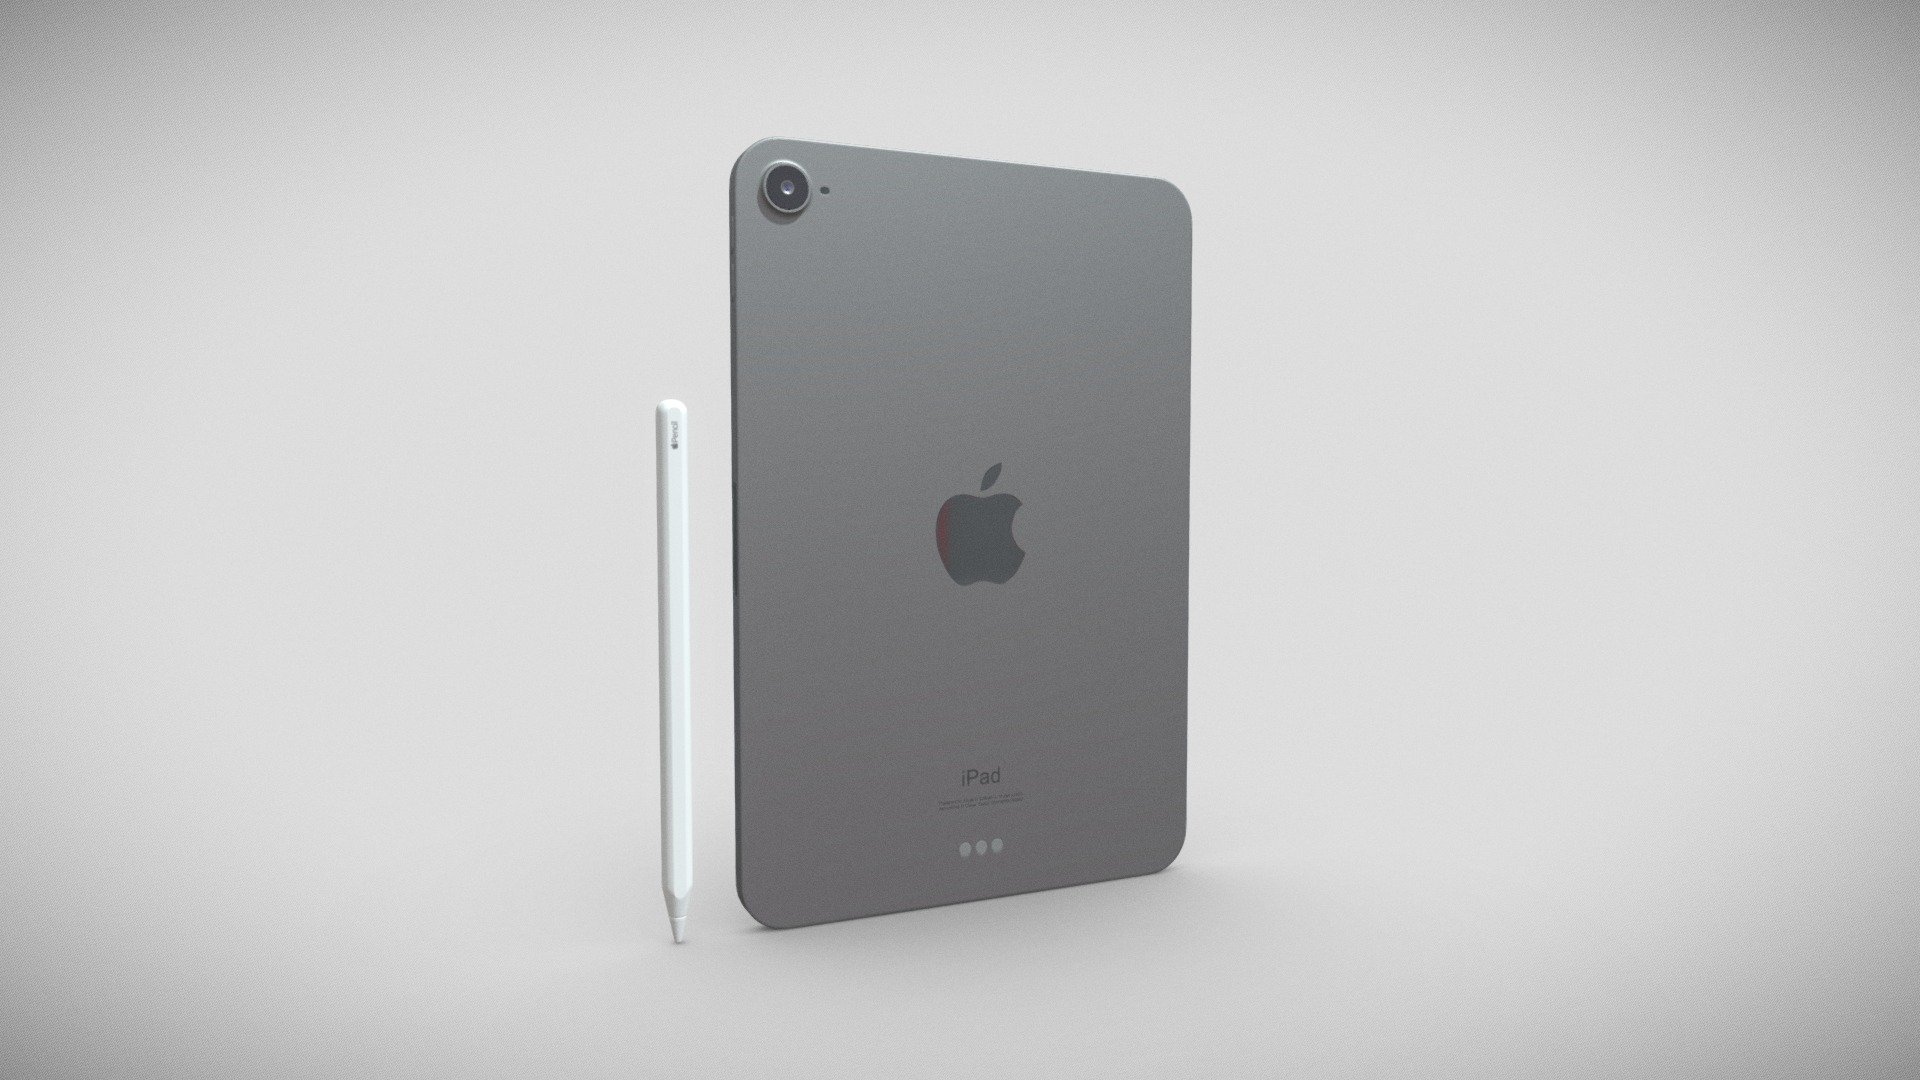 Realistic (copy) 3d model Apple iPad mini 6 all colors.

This set:
- 1 file obj standard
- 1 file 3ds Max 2013 vray material 
- 1 file 3ds Max 2013 corona material
- 1 file of 3Ds
- 4 file e3d full set of materials.
- 3 file cinema 4d standard.
- 3 file blender cycles.

Topology of geometry:
- forms and proportions of The 3D model
- the geometry of the model was created very neatly
- there are no many-sided polygons
- detailed enough for close-up renders
- the model optimized for turbosmooth modifier
- Not collapsed the turbosmooth modified
- apply the Smooth modifier with a parameter to get the desired level of detail

Materials and Textures:
- 3ds max files included Vray-Shaders
- 3ds max files included Corona-Shaders
- all texture paths are cleared

Organization of scene:
- to all objects and materials
- real world size (system units - mm)
- coordinates of location of the model in space (x0, y0, z0)
- does not contain extraneous or hidden objects (lights, cameras, shapes etc.) - Apple iPad mini 6 all colors - Buy Royalty Free 3D model by madMIX 3d model